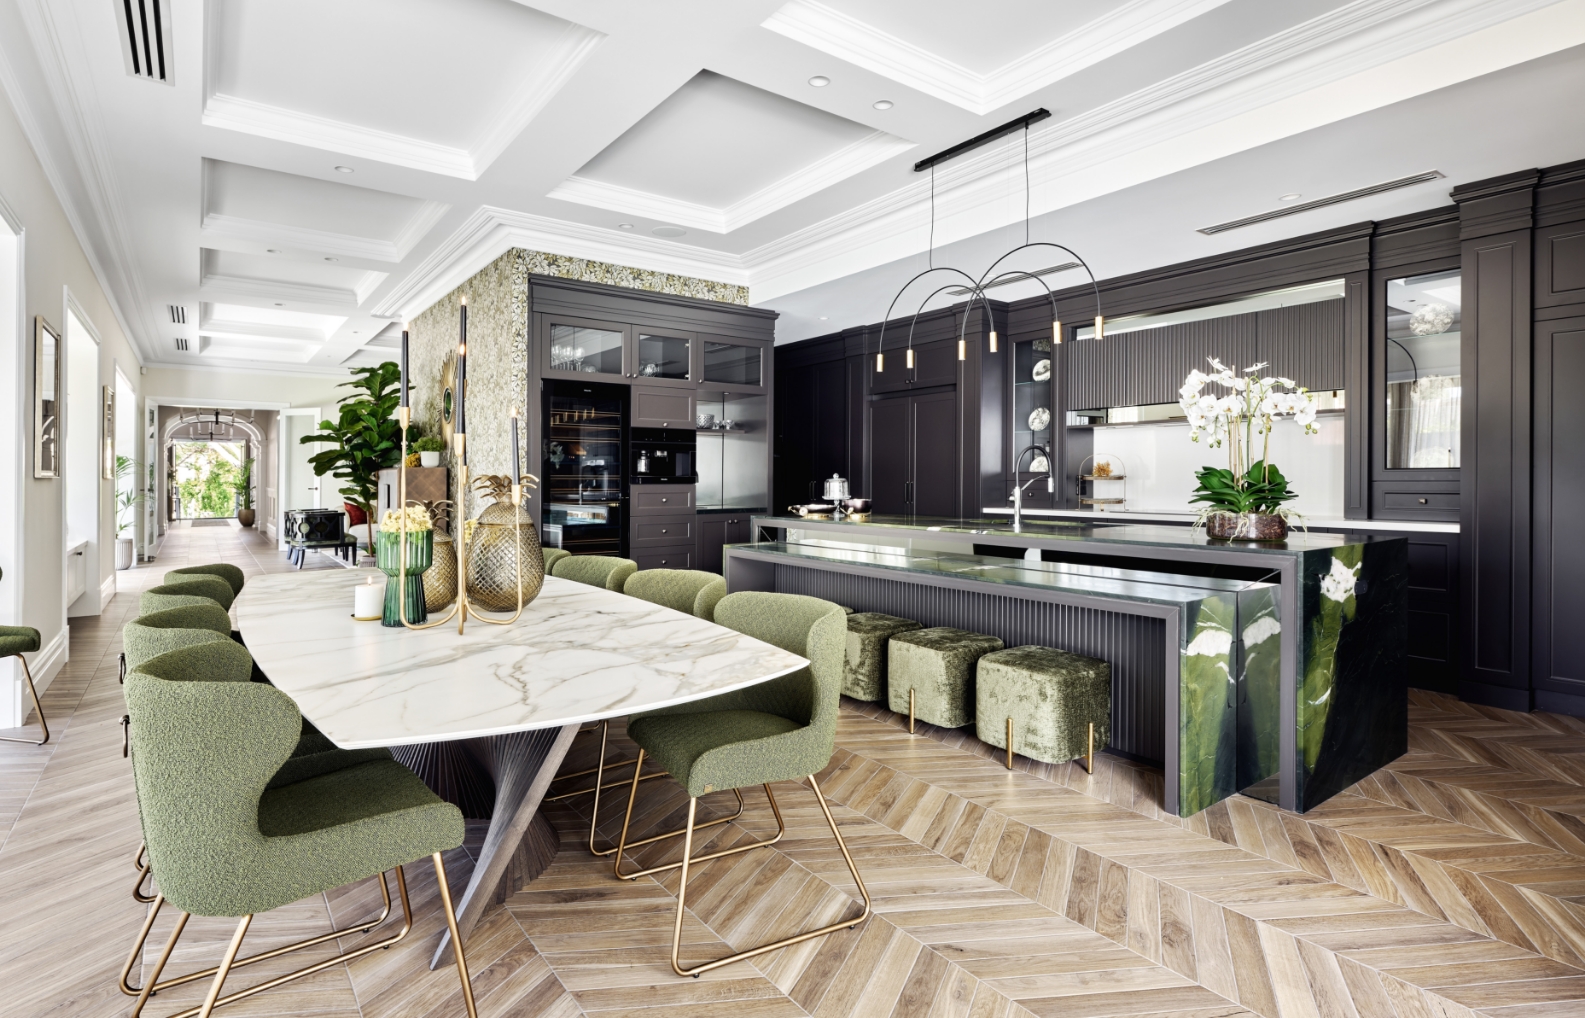 Modern kitchen interior with marble island and green accents.